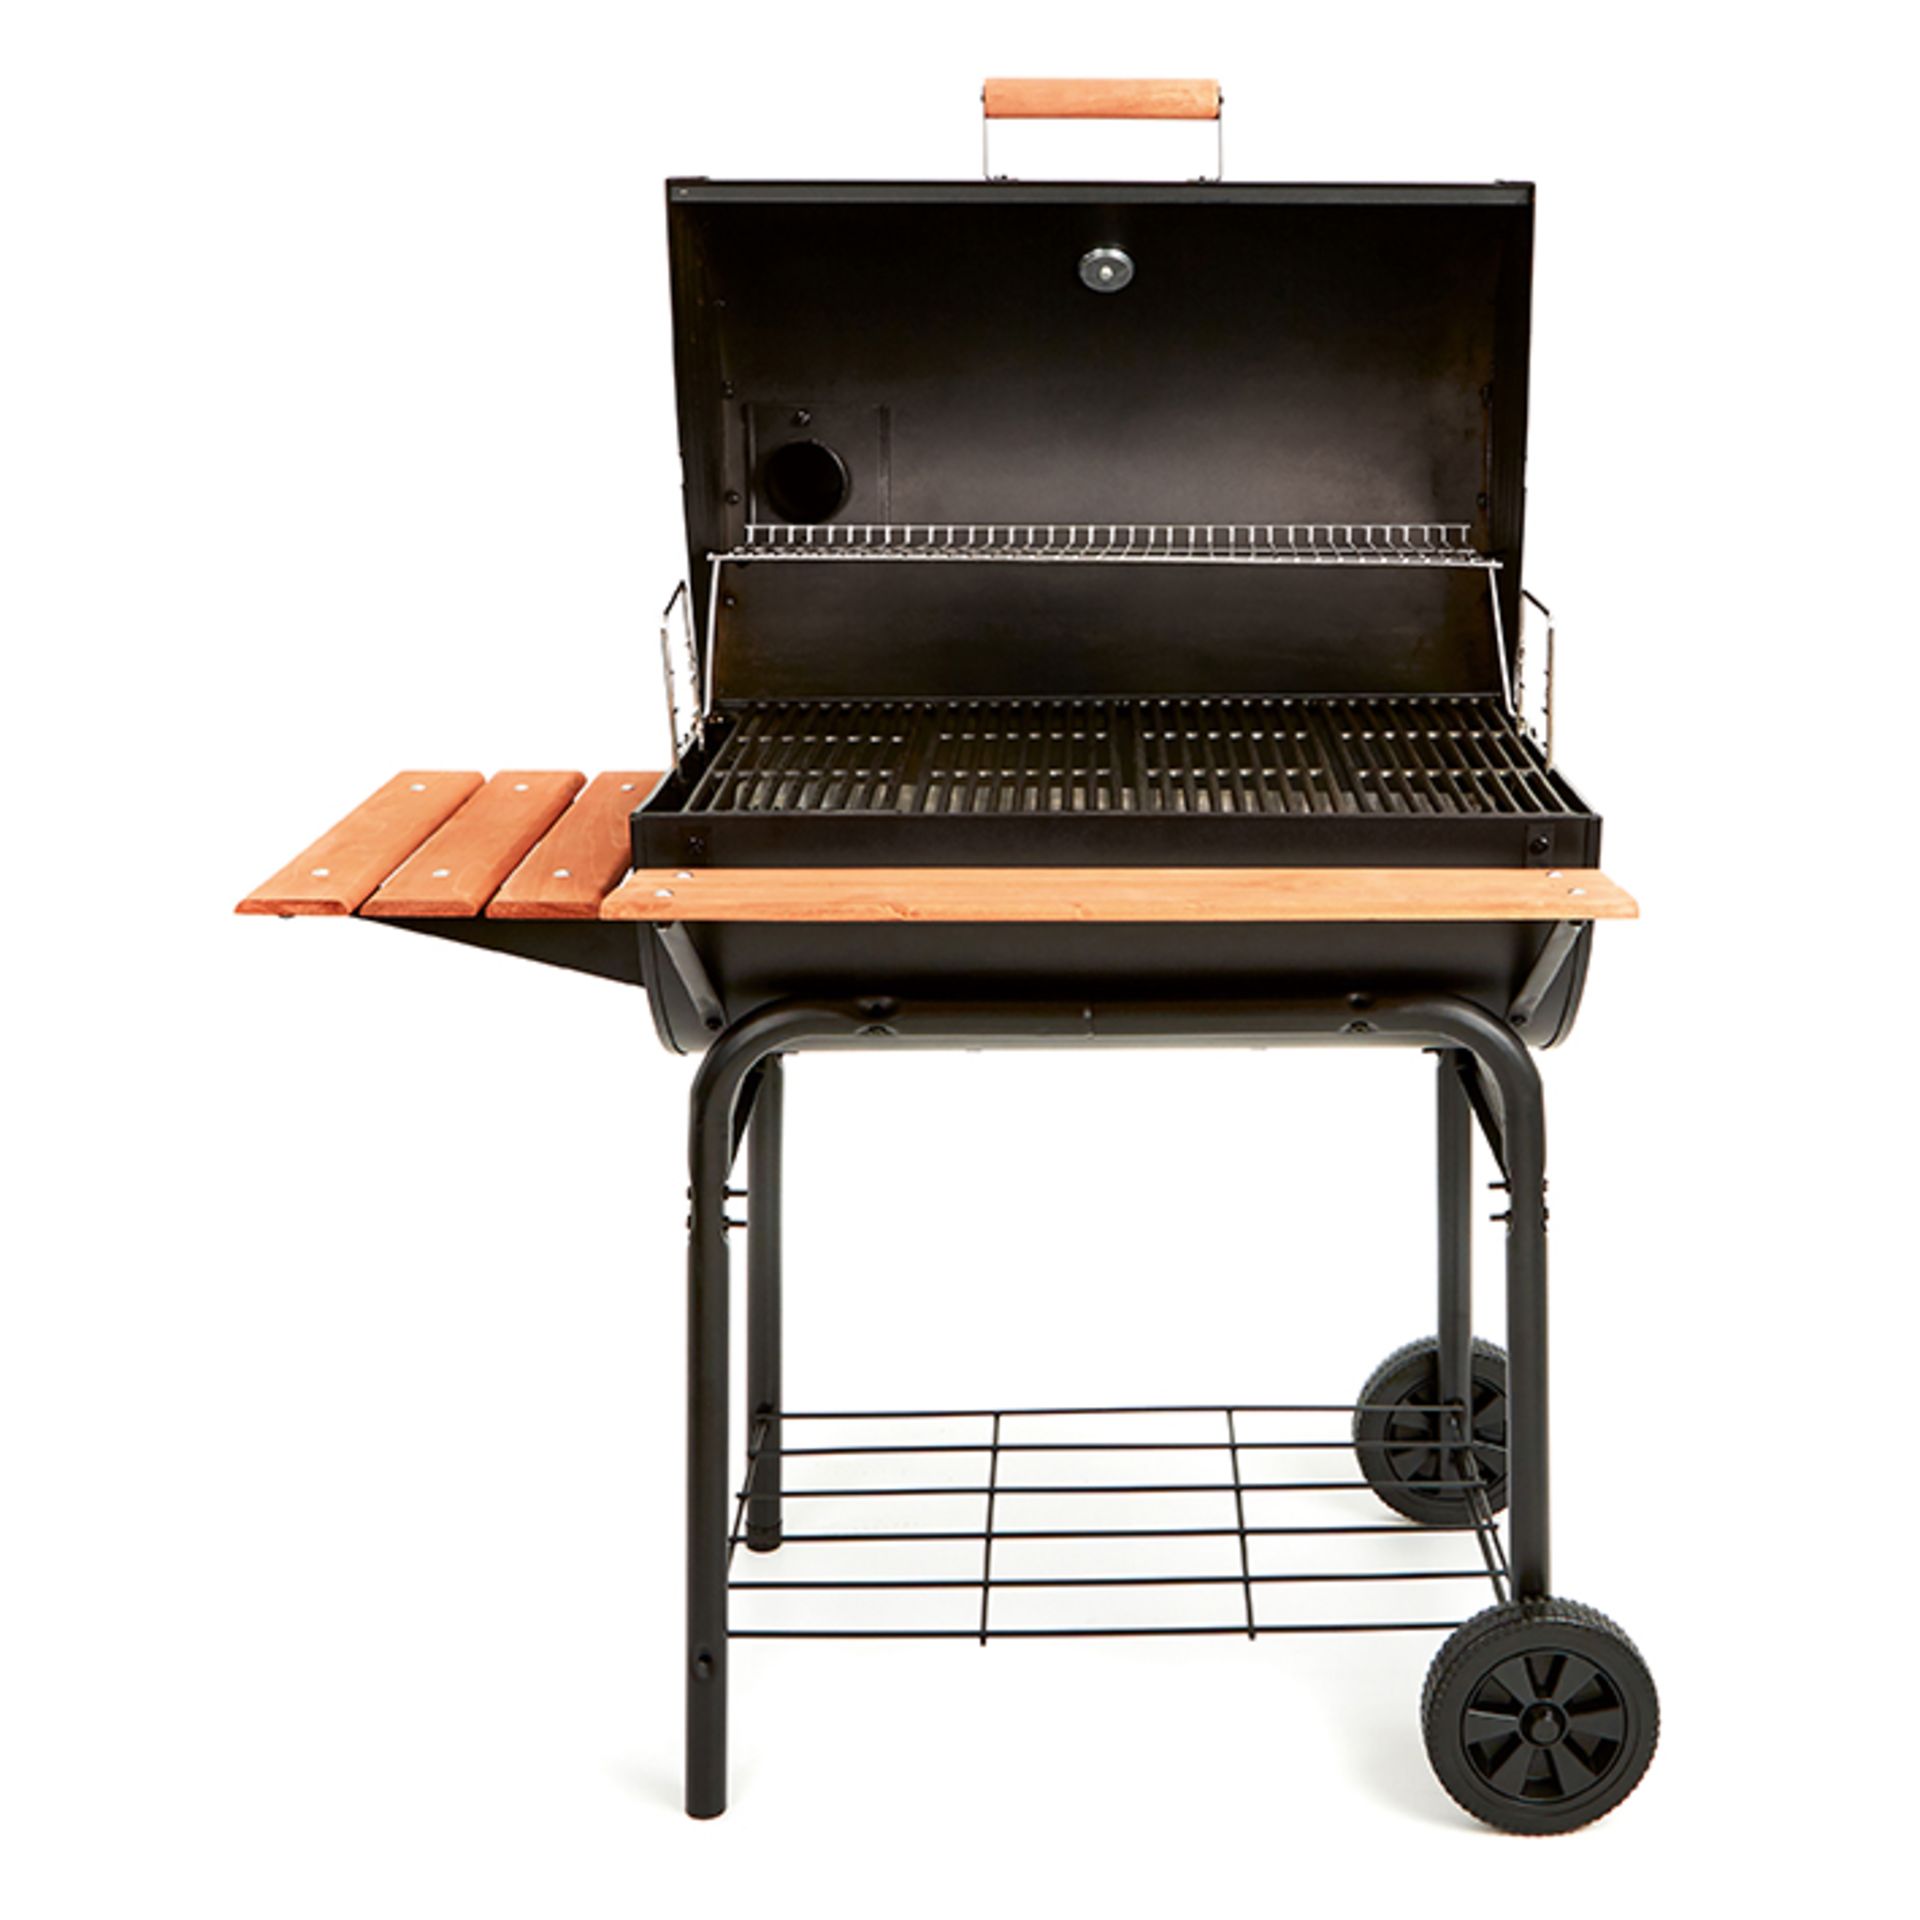 BRAND NEW* CHARCOAL GRILL PRO BLACK PATIO OUTDOOR GARDEN XL COOKING DELUXE AIR NEW CHAR BBQ - Bild 4 aus 8